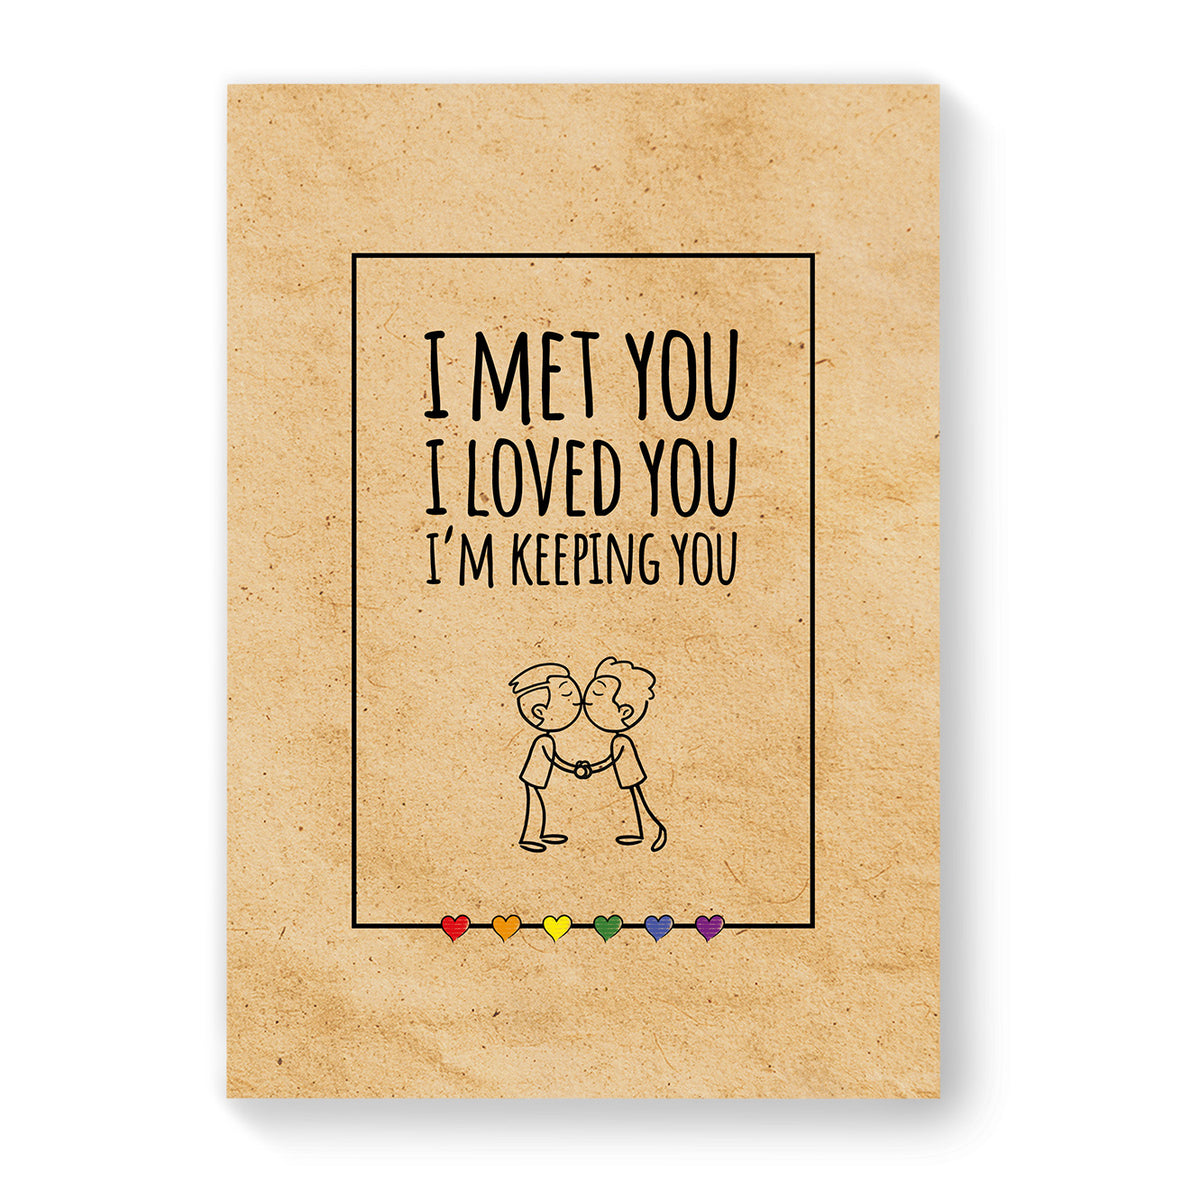 I met you, I loved you - Gay Couple Card - Vintage Brown | Gift